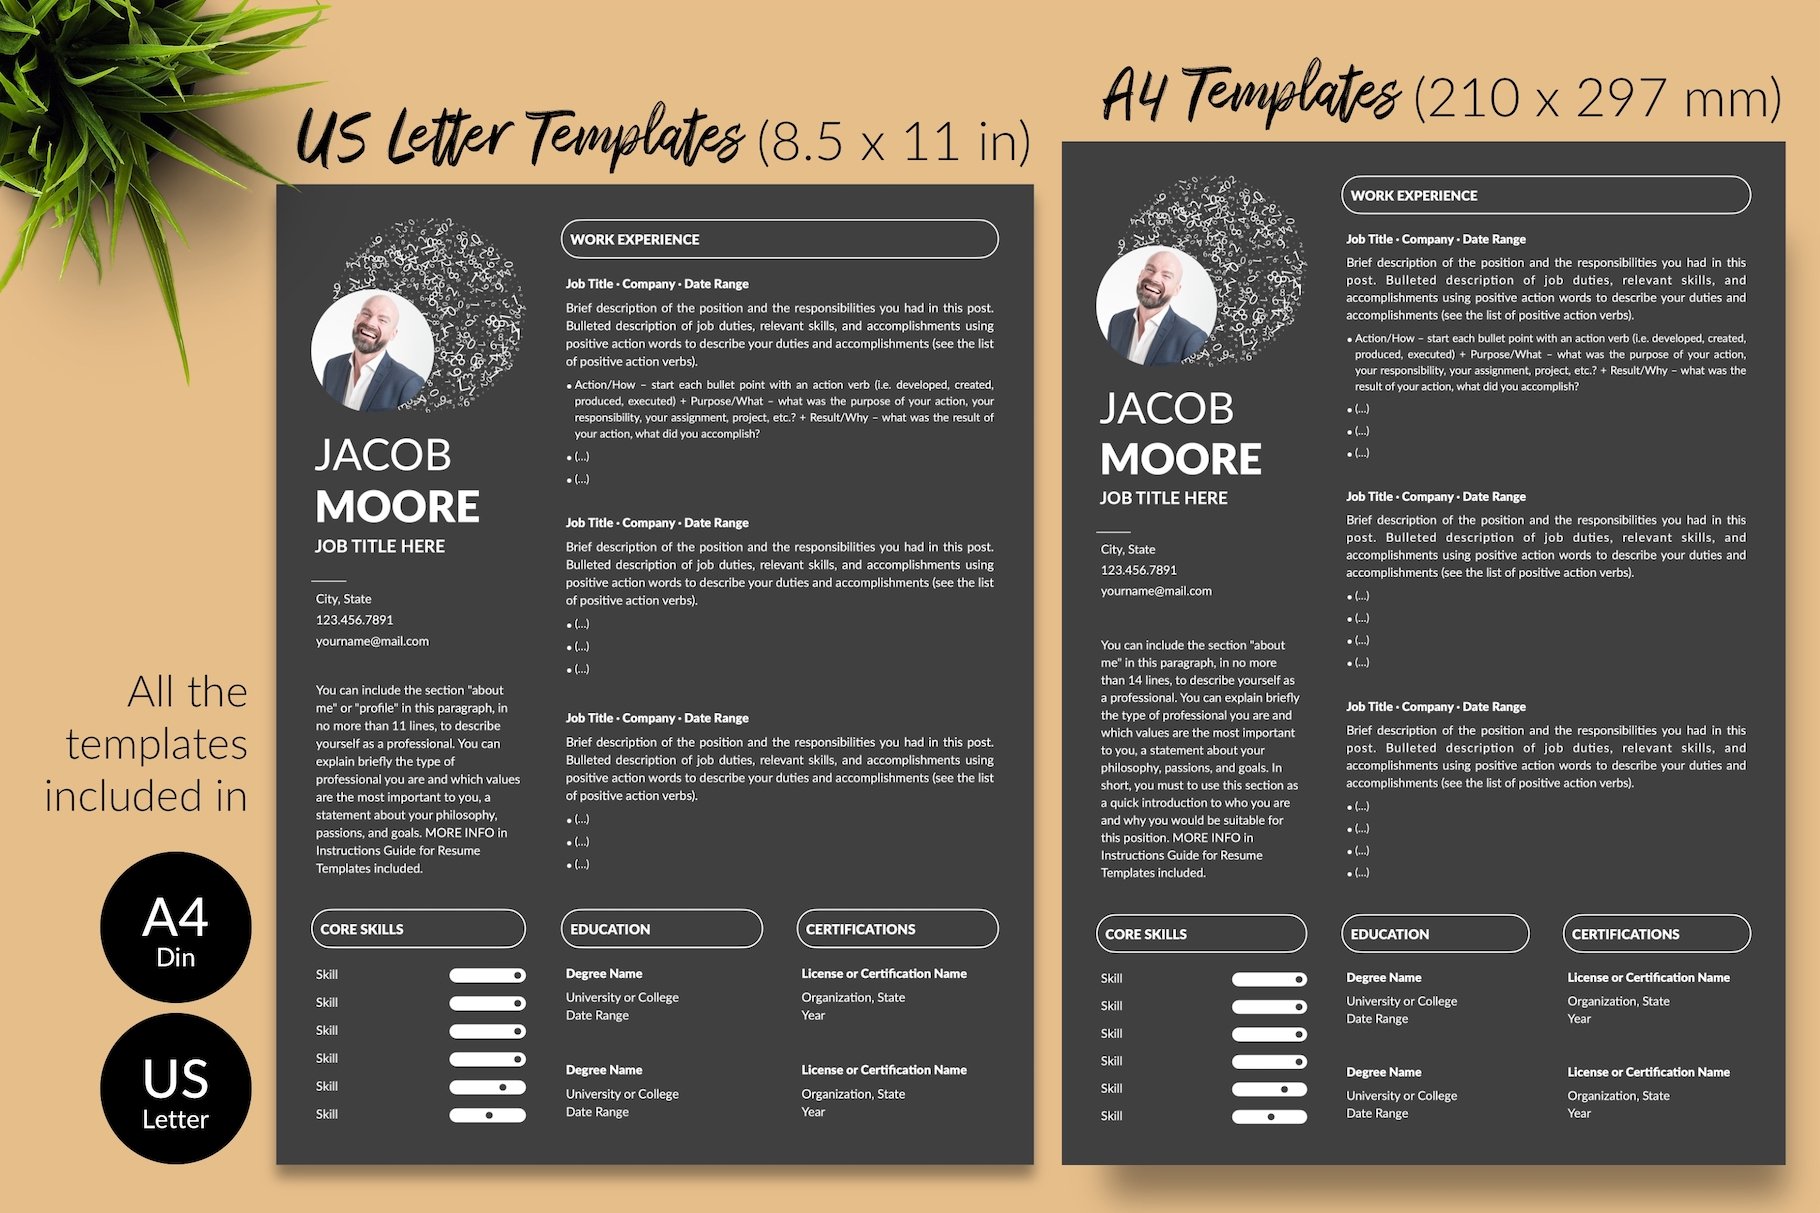 resume cv template jacob moore 282in1 special edition29 for creative market 08 size din a4 us letter 893